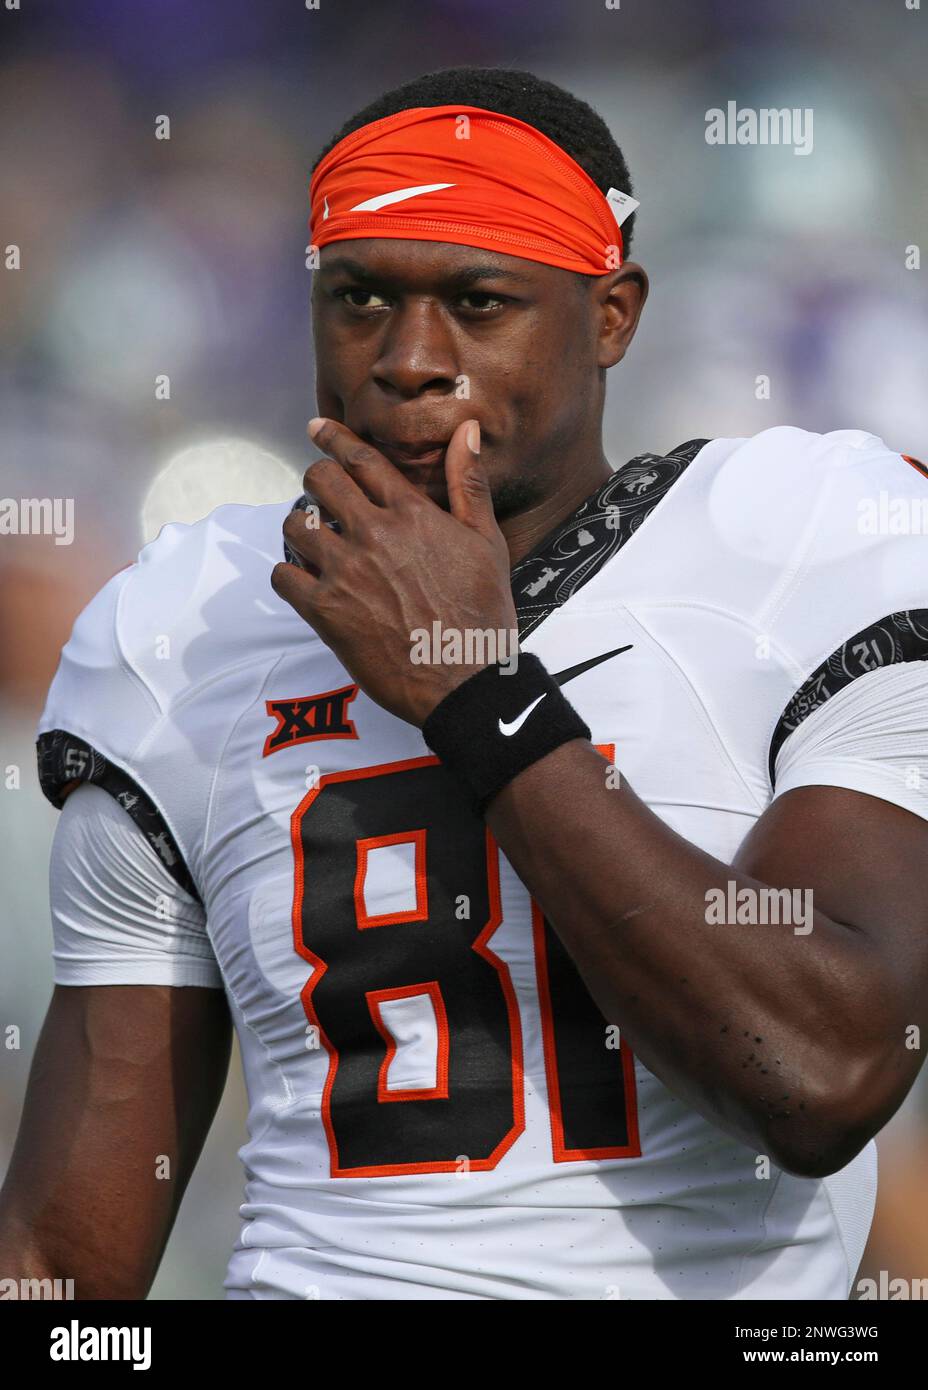 MANHATTAN, KS - OCTOBER 13: Oklahoma State Cowboys wide receiver LC  Greenwood (81) before a Big 12 football game between the Oklahoma State  Cowboys and Kansas State Wildcats on October 13, 2018